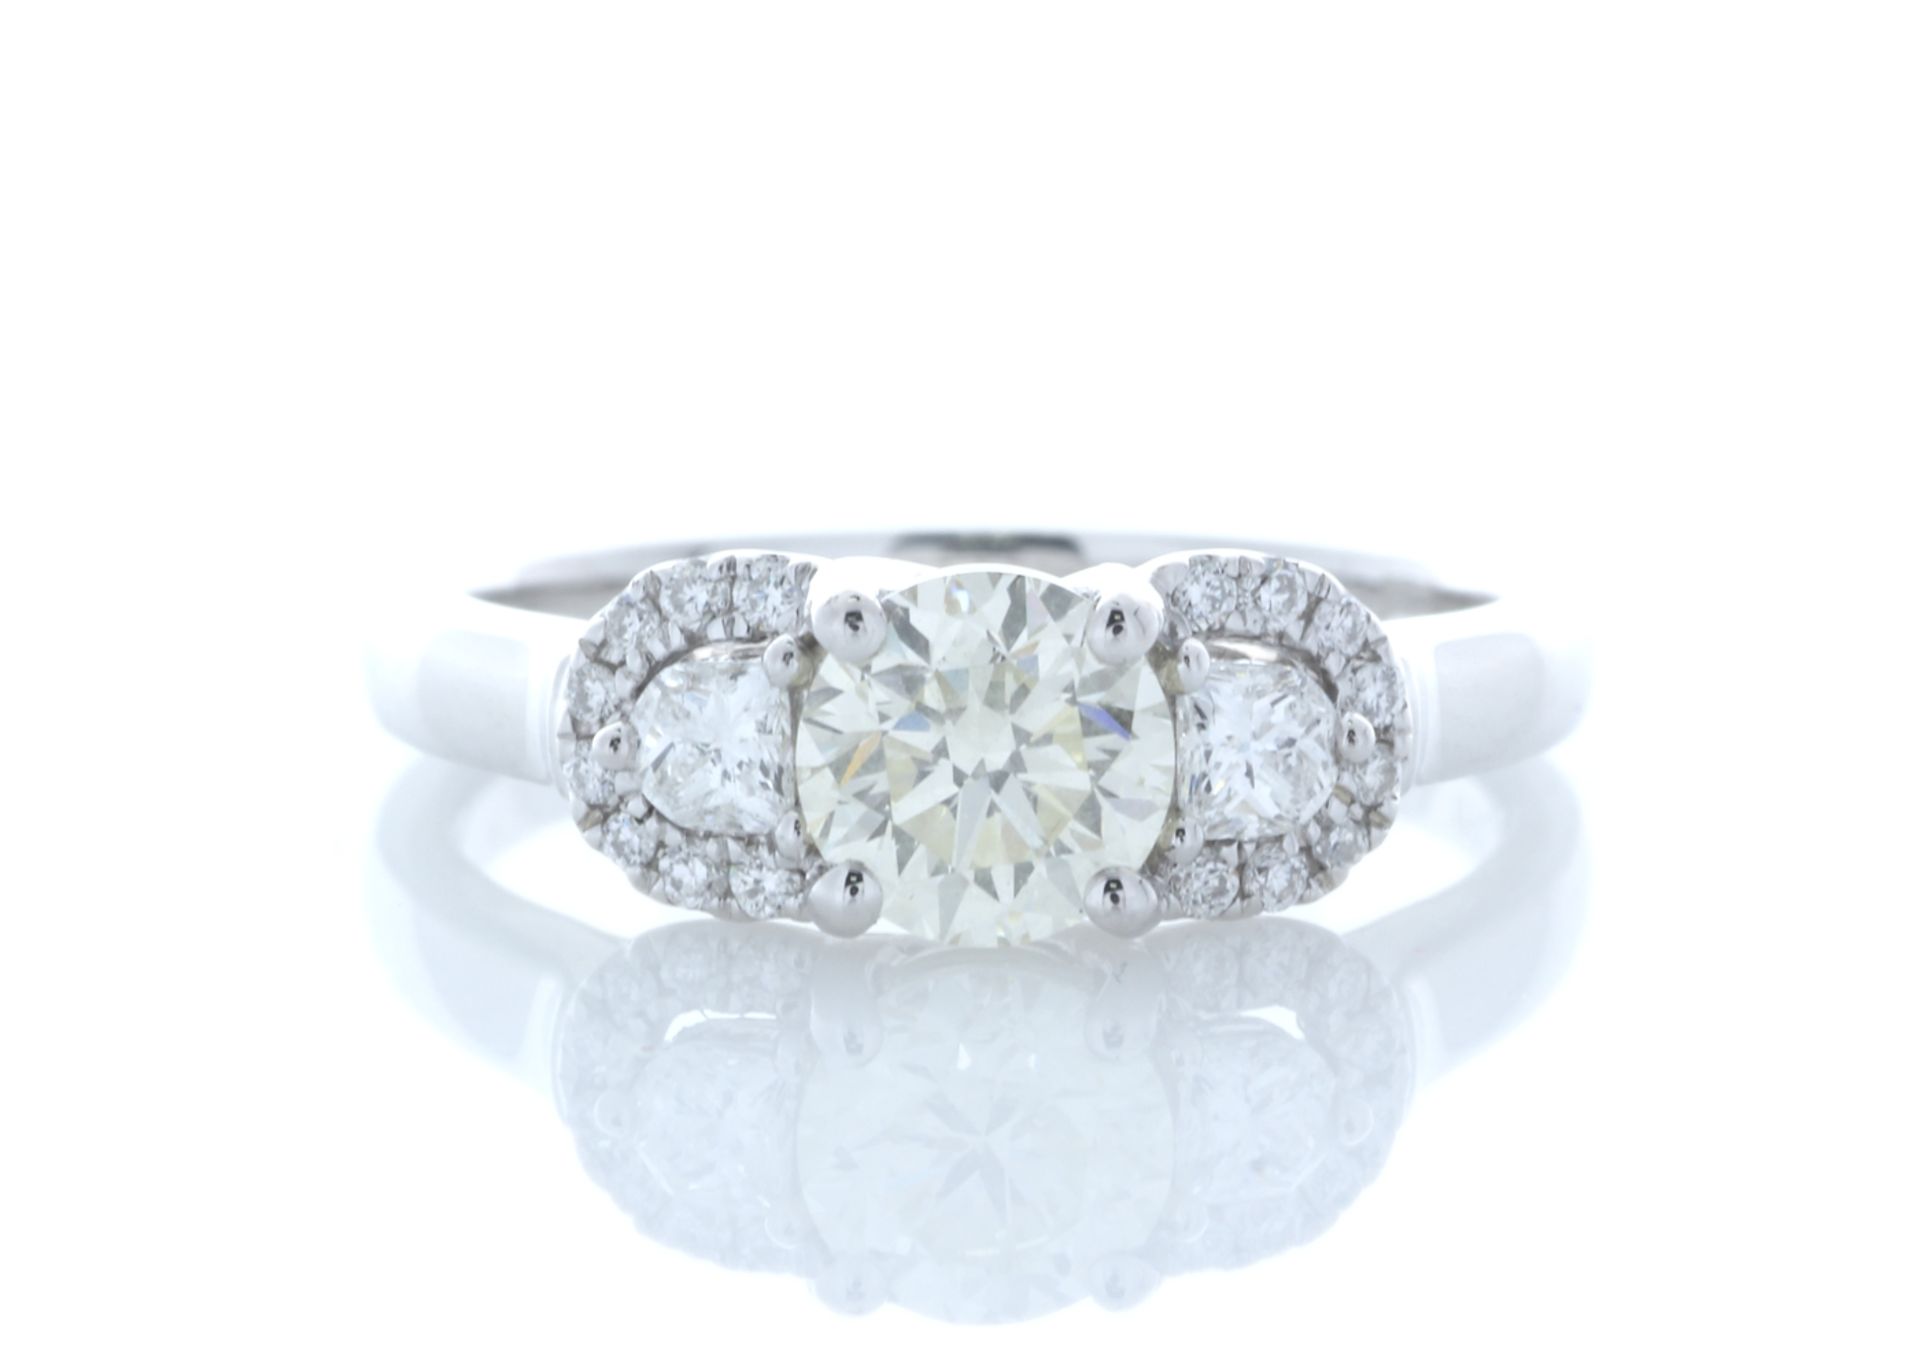 18ct White Gold Three Stone Claw Set Diamond Ring (0.75) 1.02 Carats - Valued by IDI £9,795.00 - One